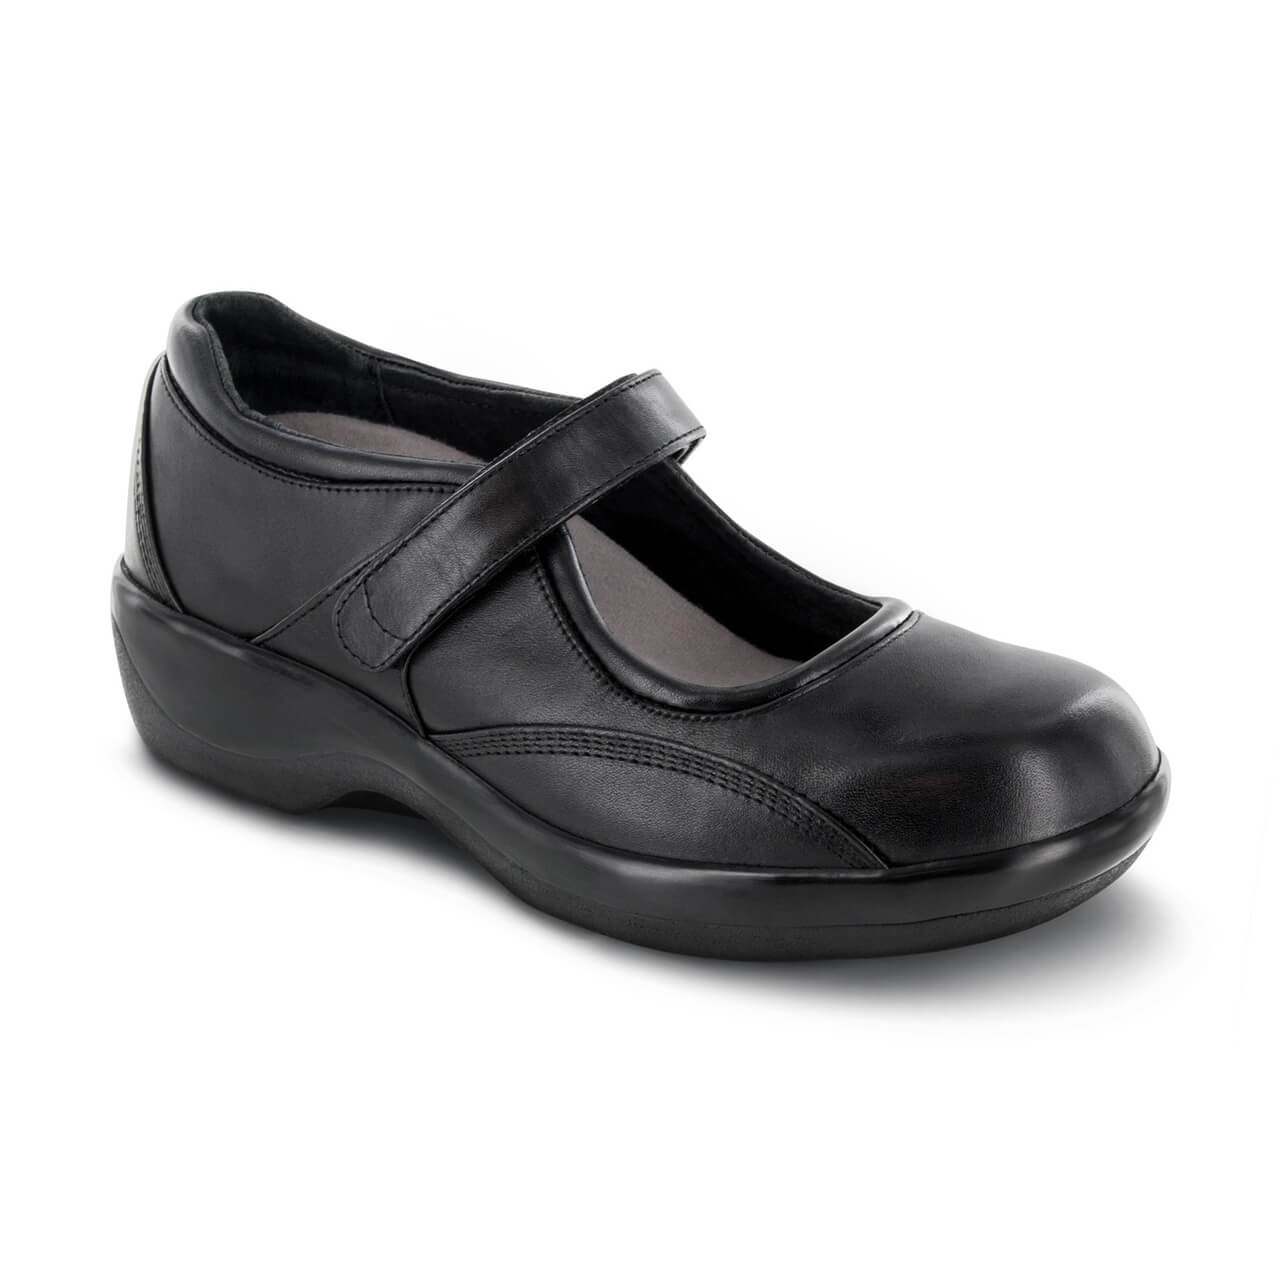 comfortable black mary jane shoes